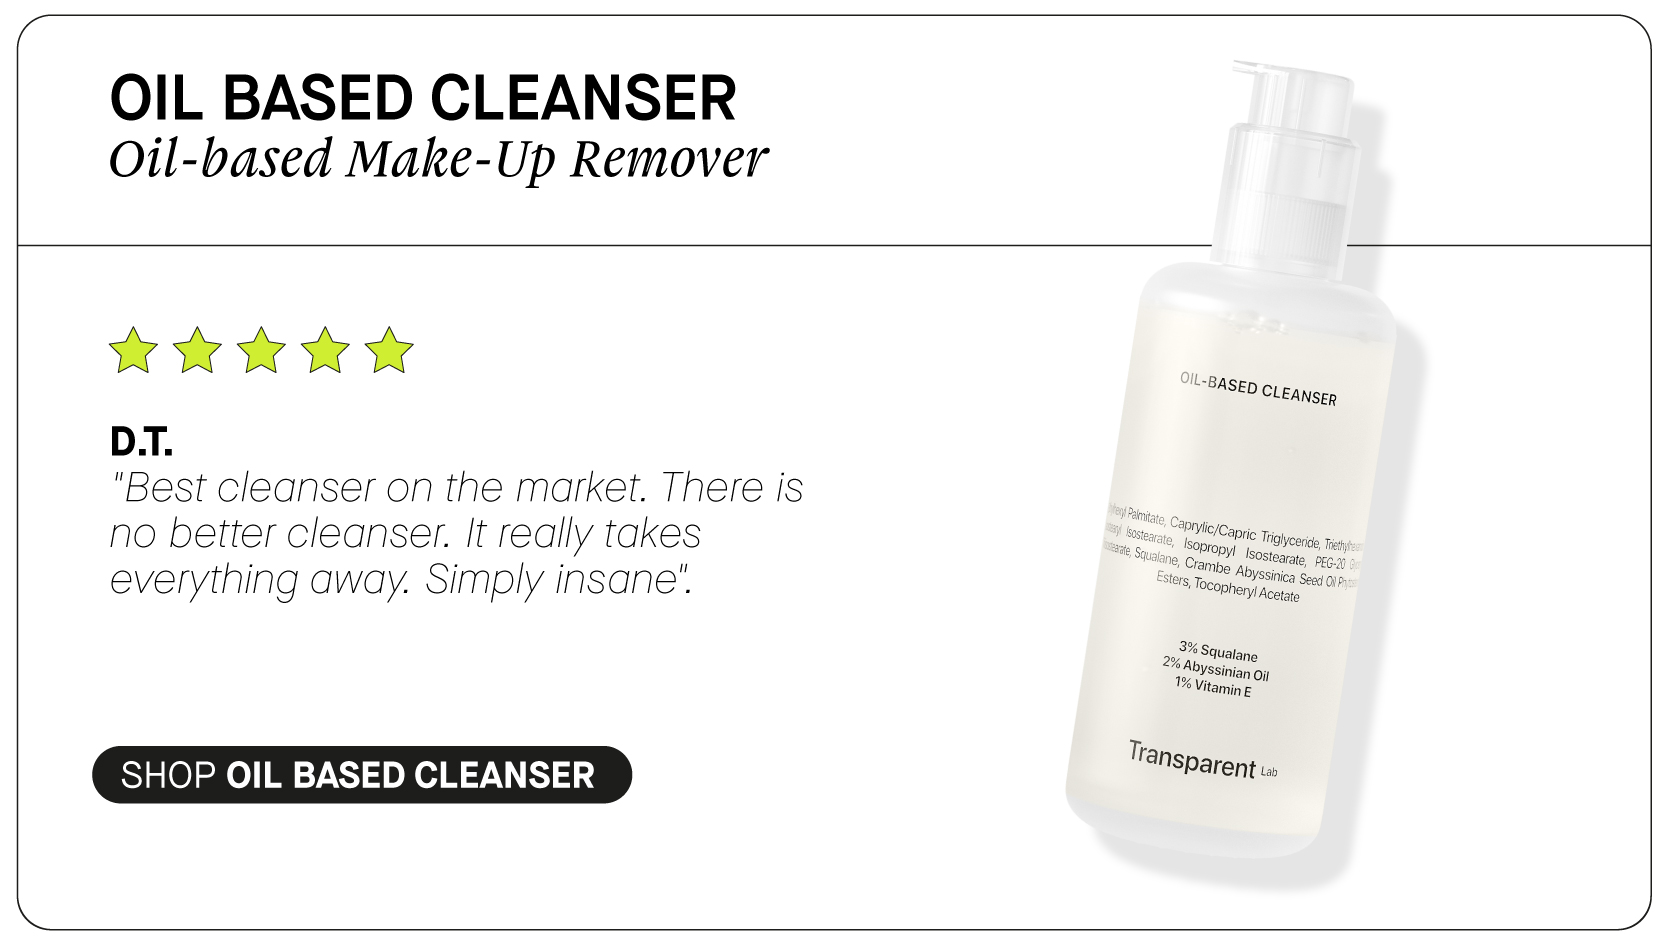  OIL BASED CLEANSER Oil-based Make-Up Remover W R AW D.T. 'Best cleanser on the market. There is no better cleanser. It really takes everything away. Simply insane. BASED cUgapsgy Ssinian 0 T SHOP OIL BASED CLEANSER Msparent. 